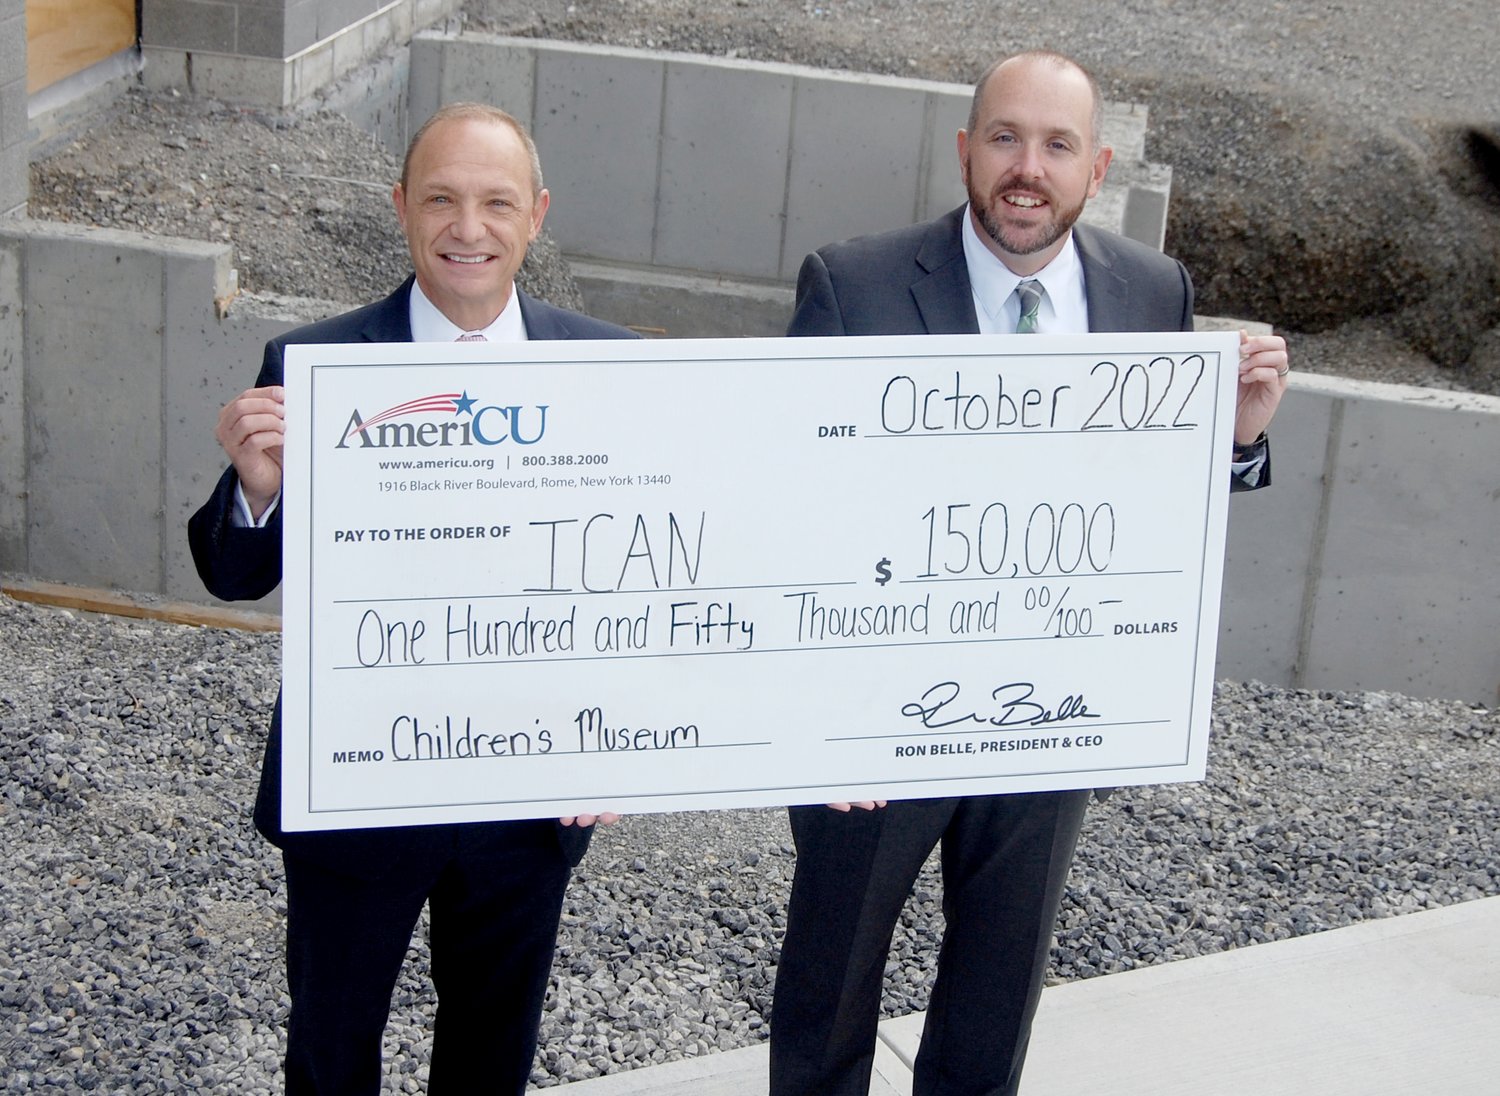 Ron Belle, AmeriCU president and CEO, left, presents a check for $150,000 to Steven Bulger, ICAN executive director and CEO, recently. The funds will be used to help construct the gift shop in the Children’s Museum at ICAN’s Family Resource Center in Utica.